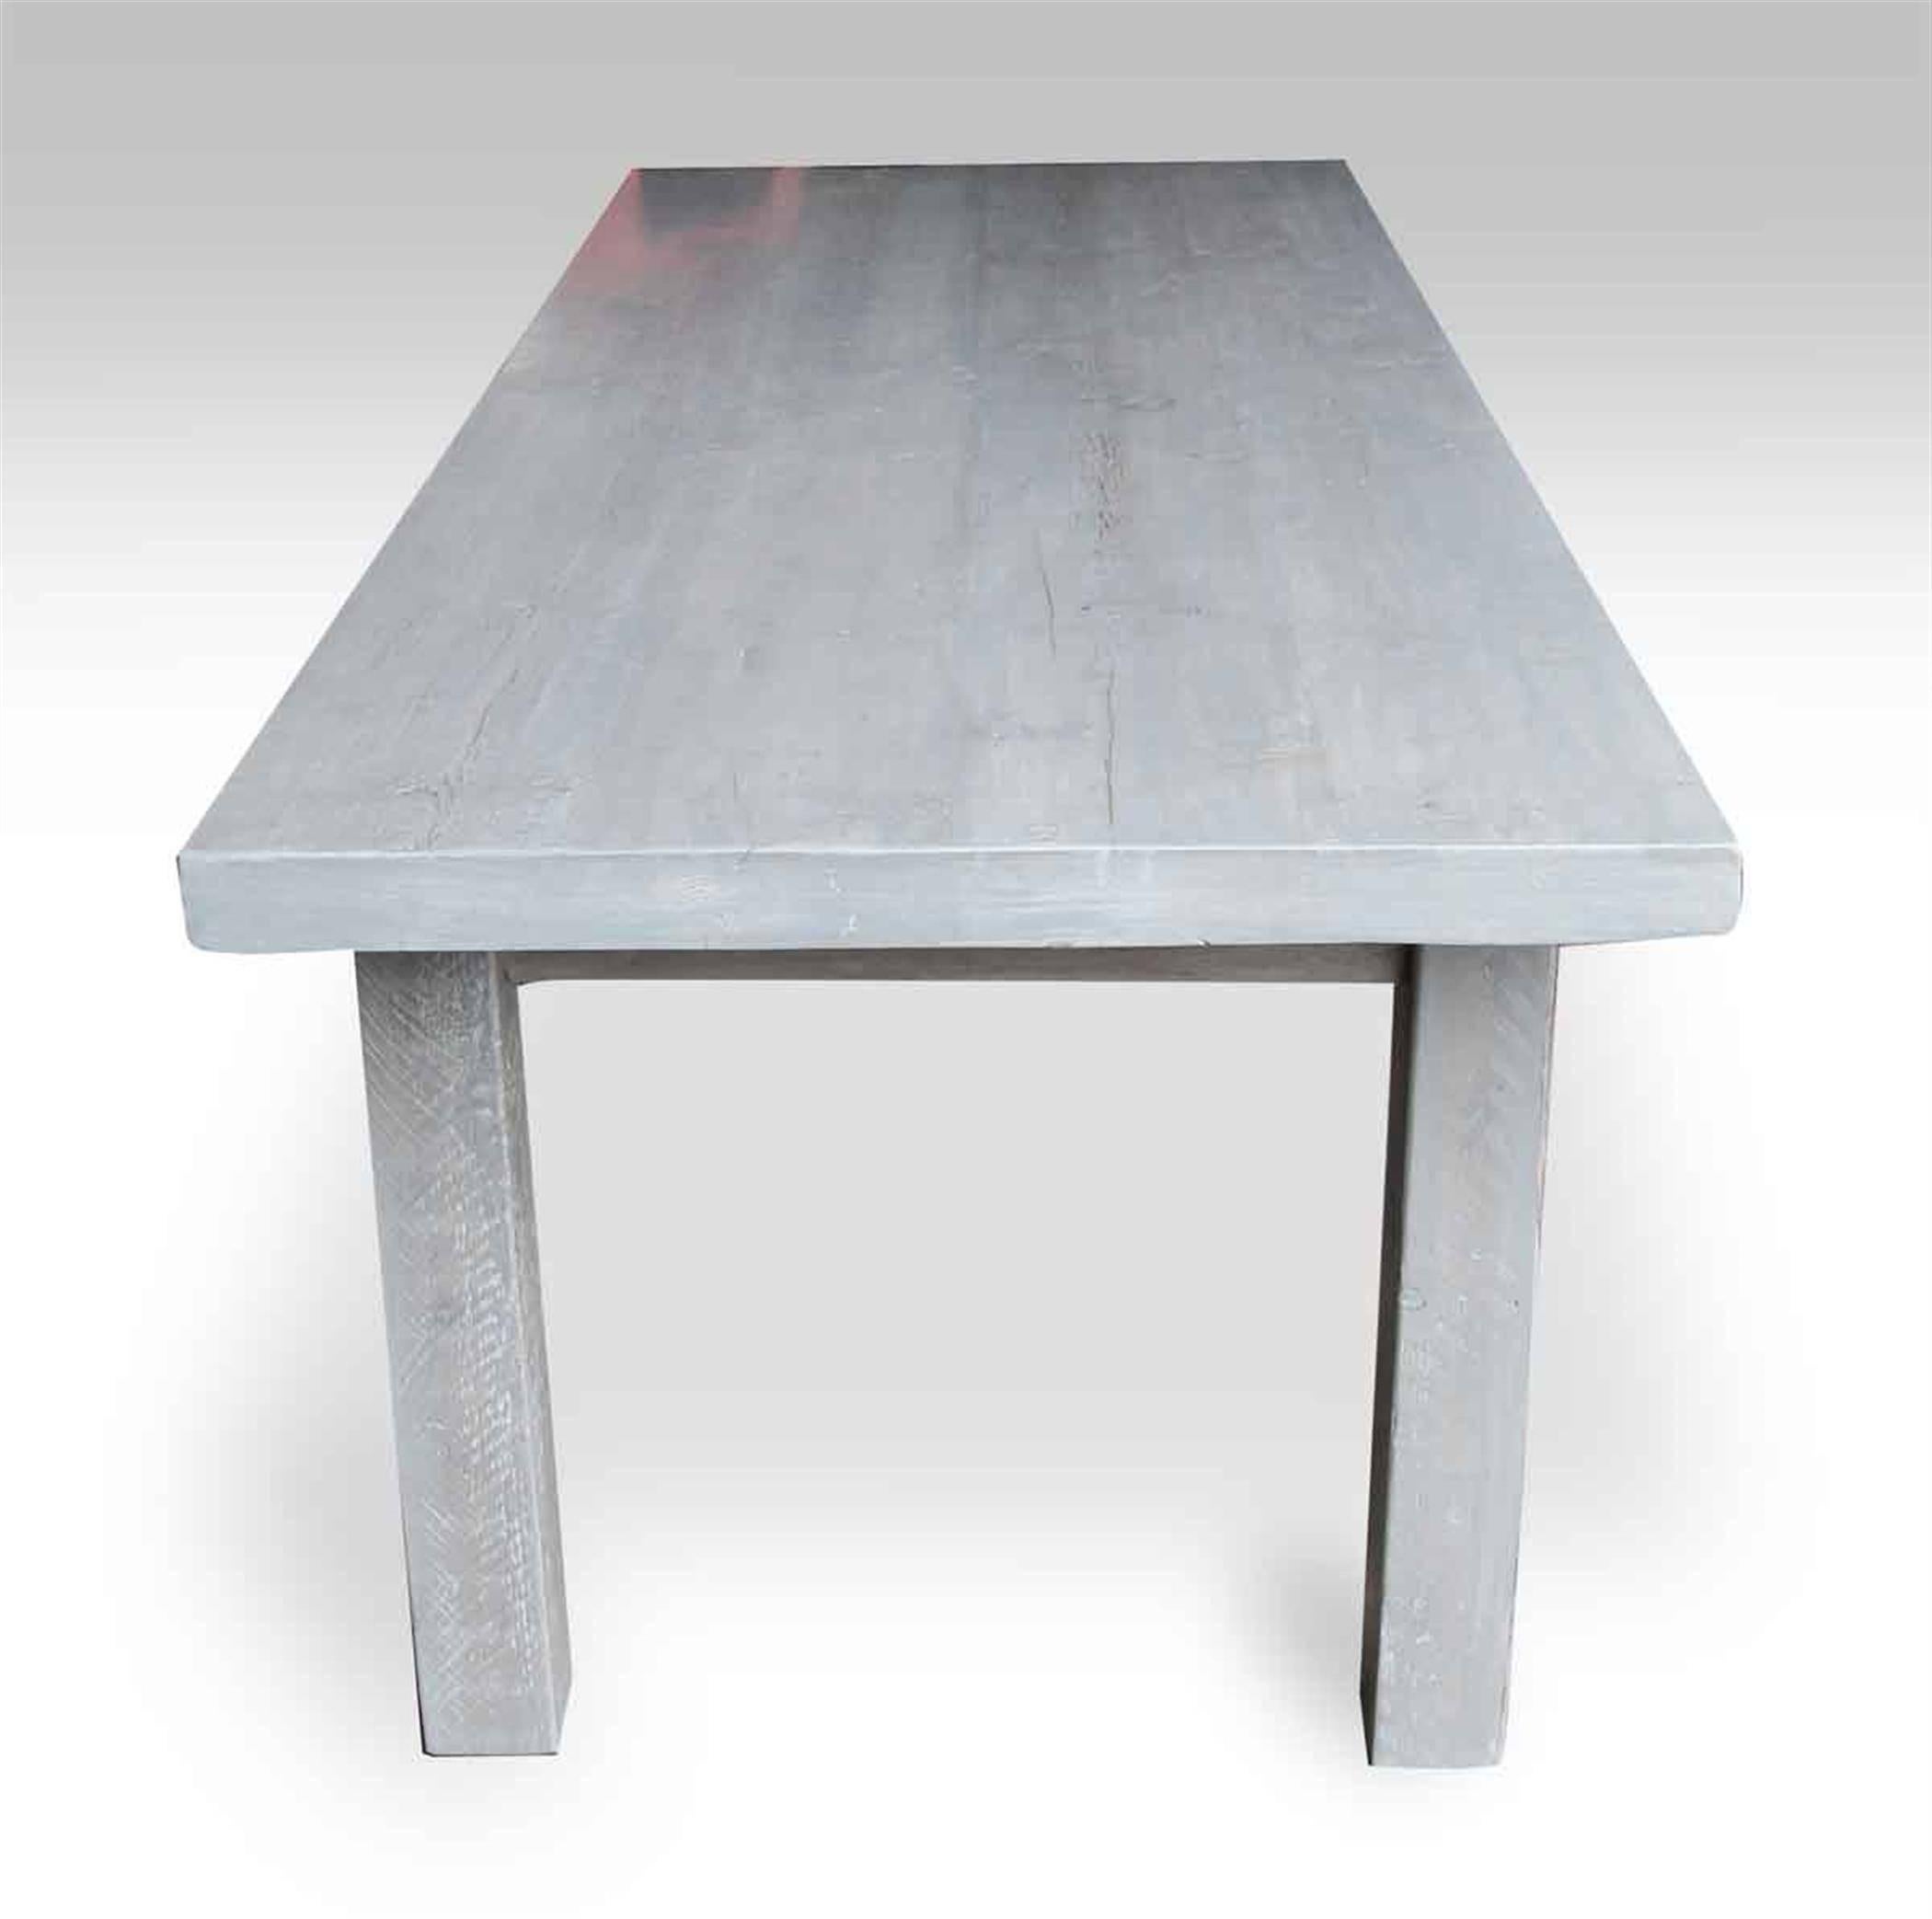 Rustic Farm Table with Driftwood Stain and Tapered Legs